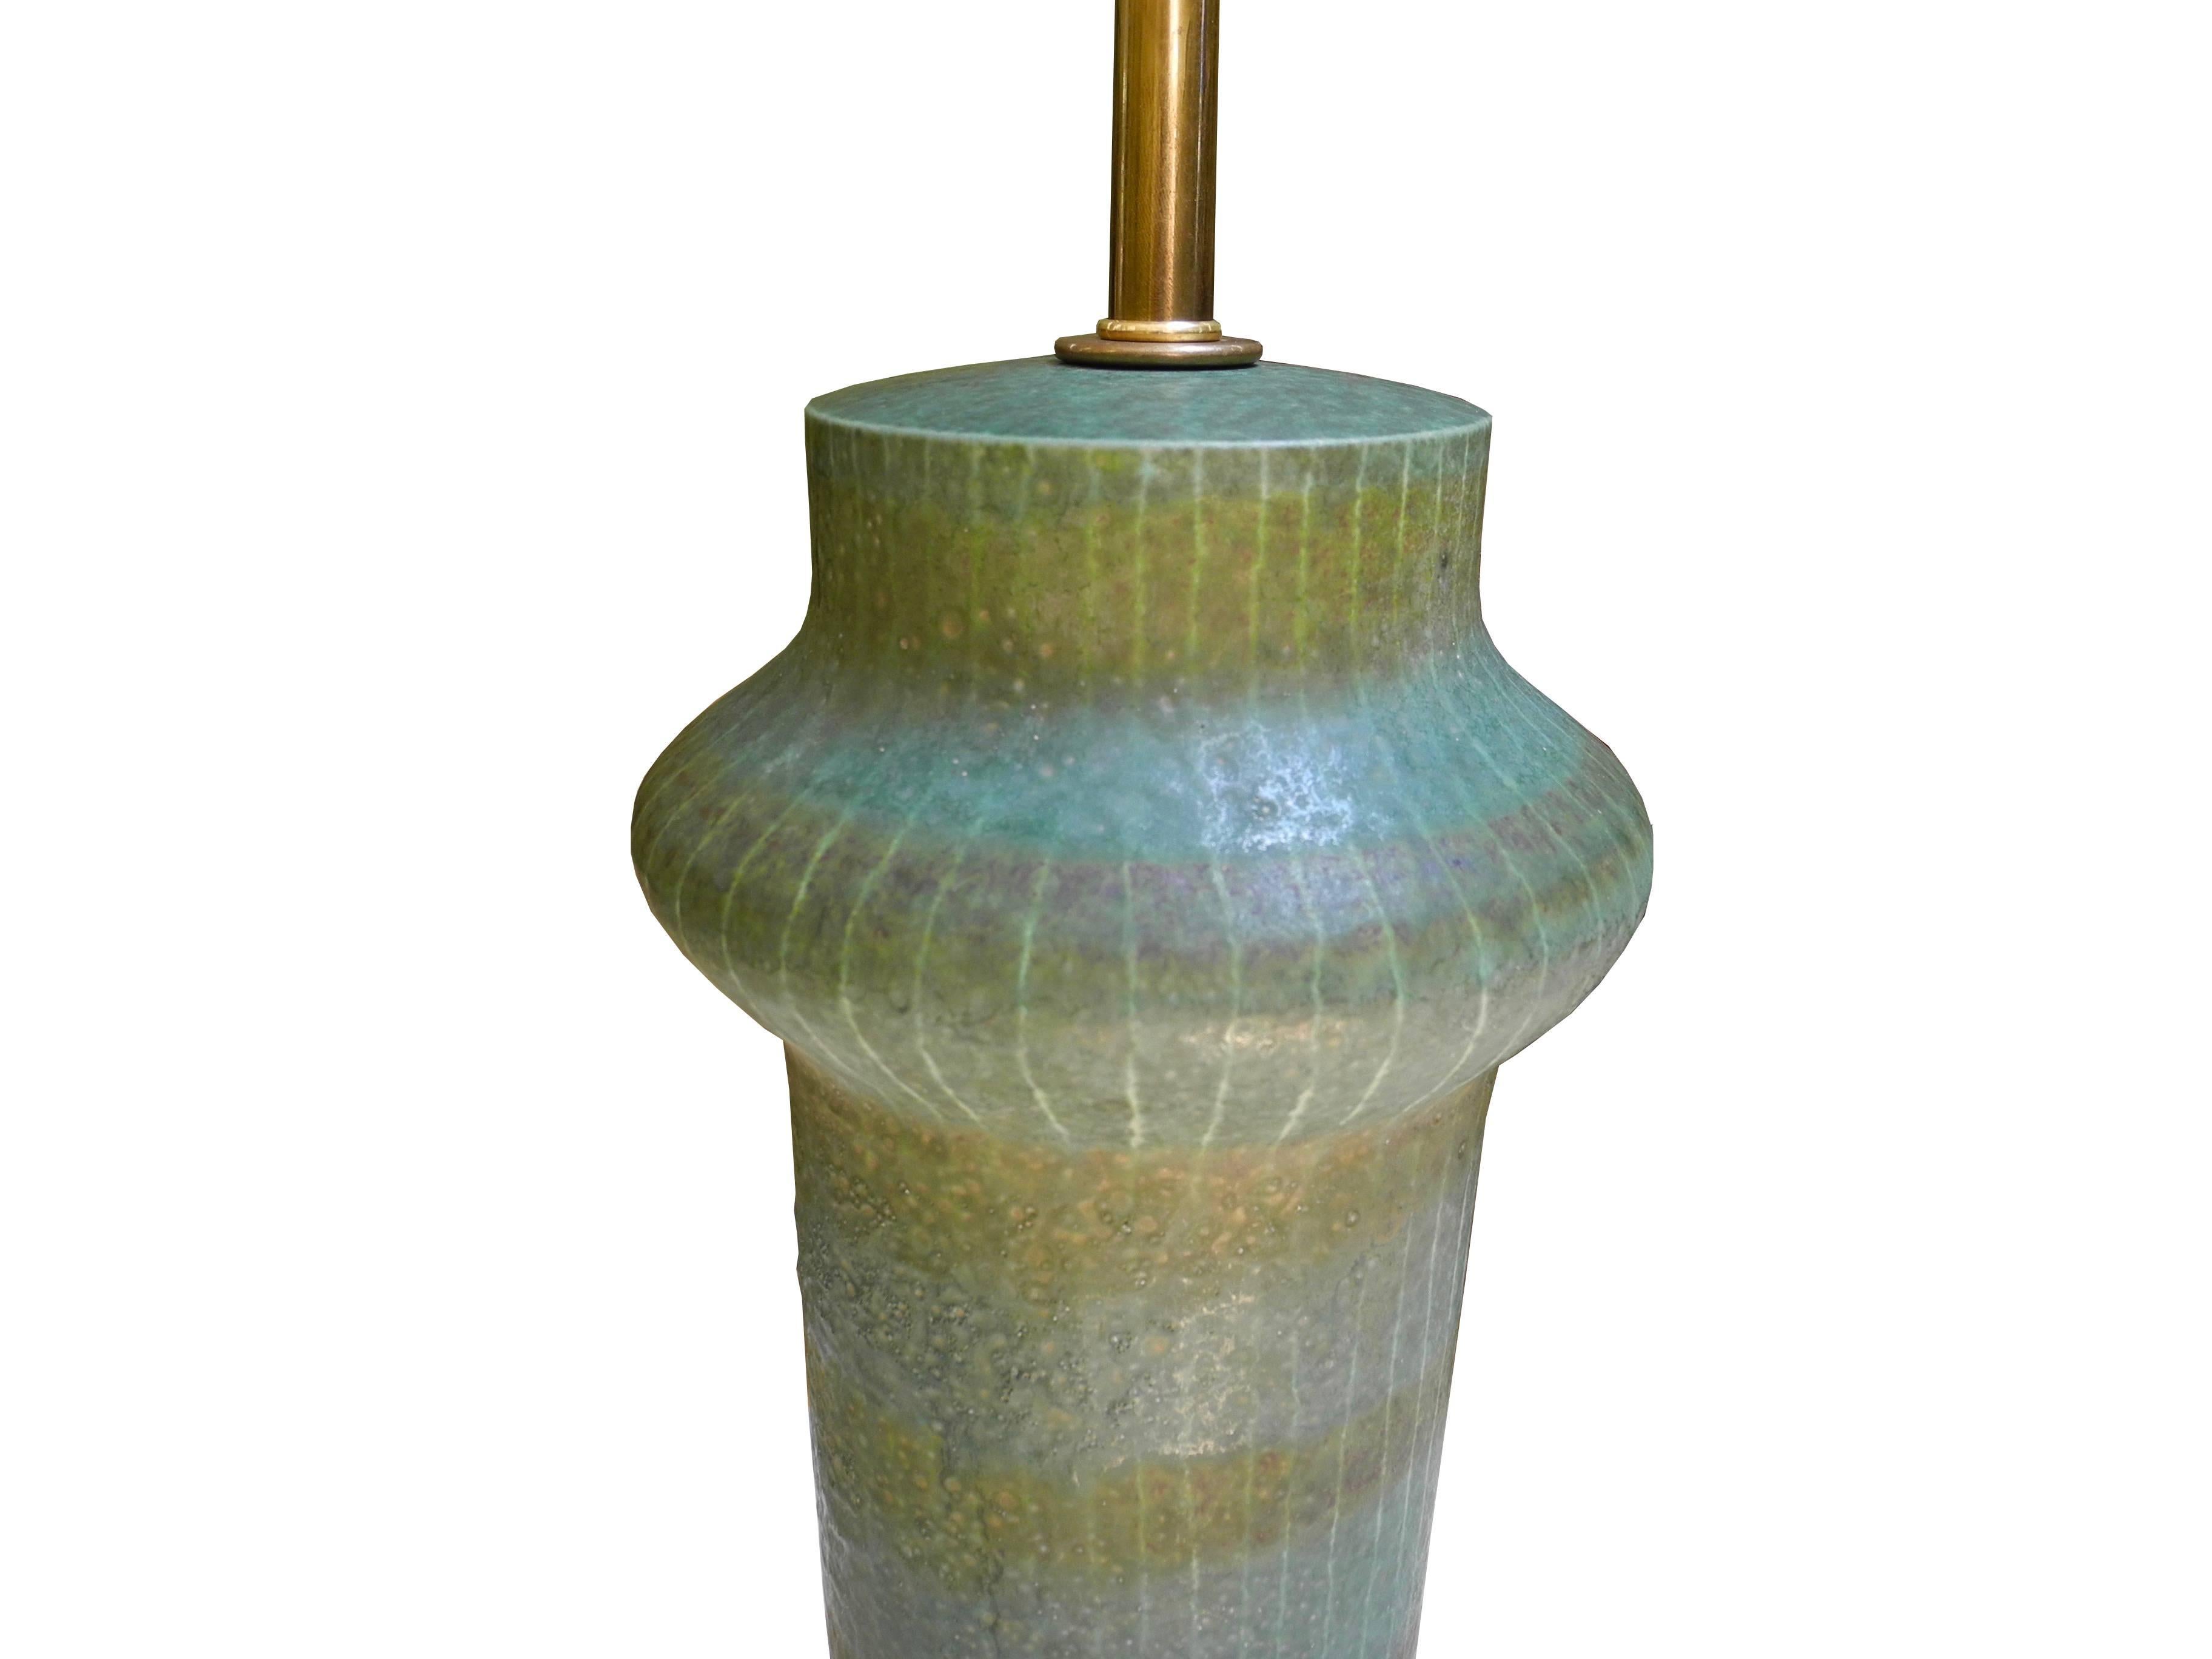 This 1950s ceramic lamp is stamped Made in Italy yet has a beautiful glaze and shape that is reminiscent of Japanese or Danish midcentury pottery. Top of the ceramic measures 14.25 inches.